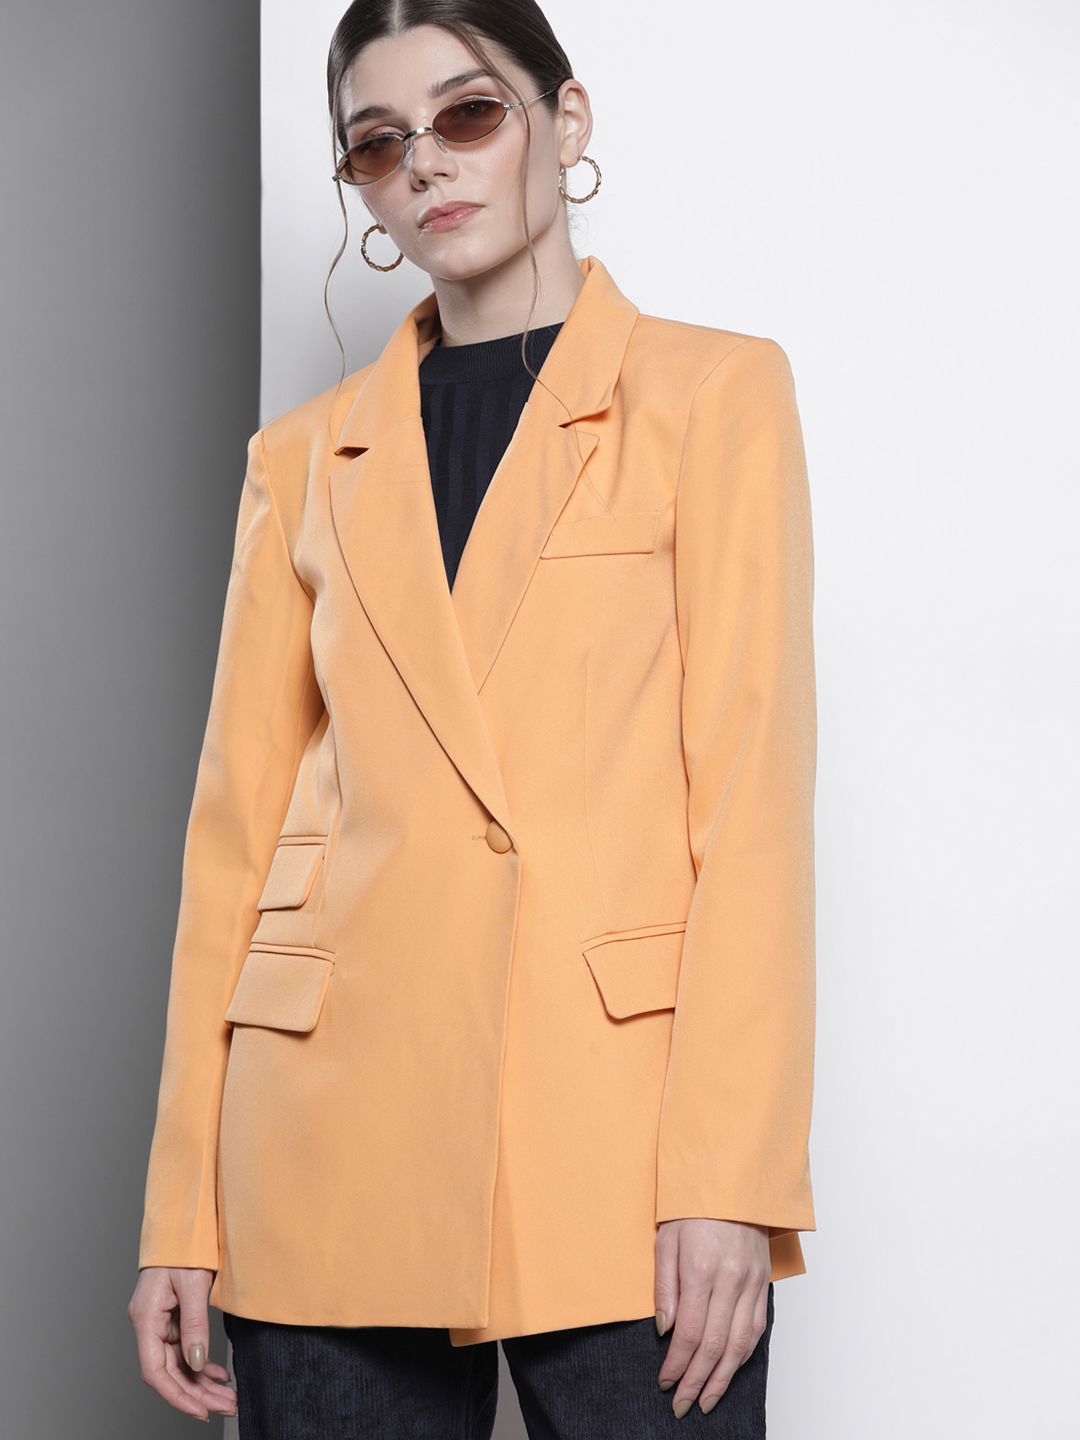 Missguided Women Orange Solid Single-Breasted Blazer Price in India